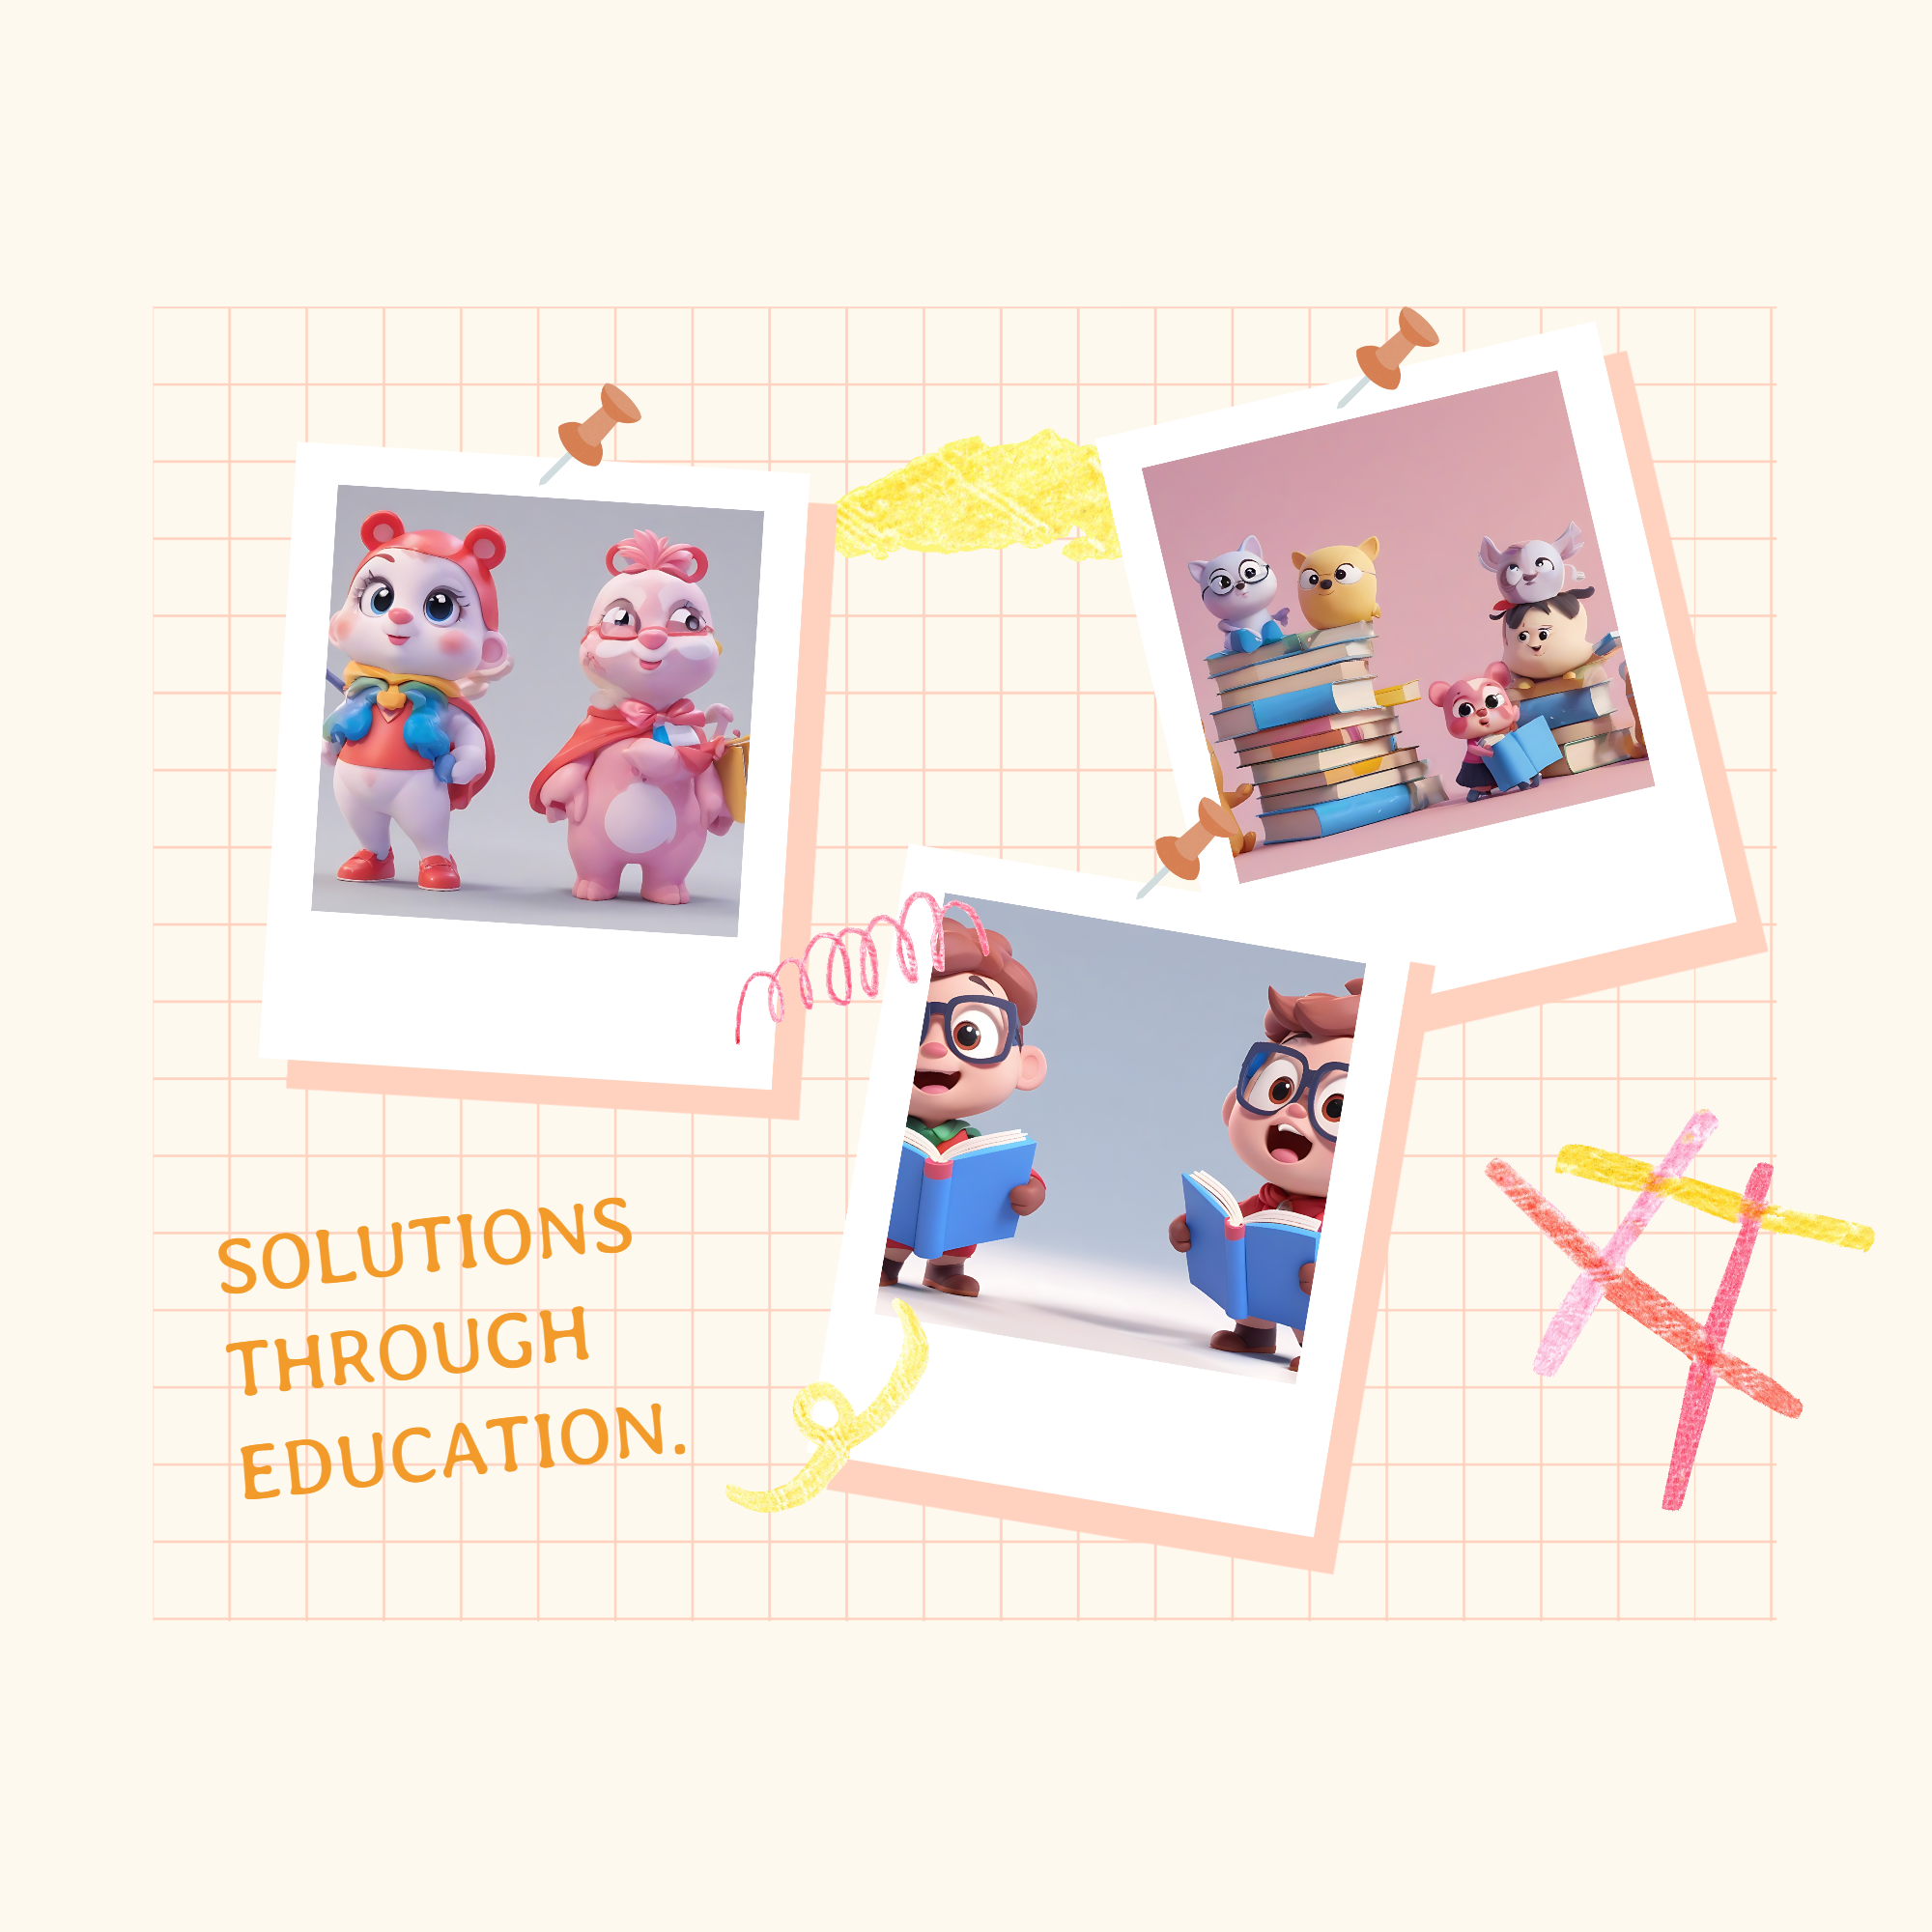 Solutions through education